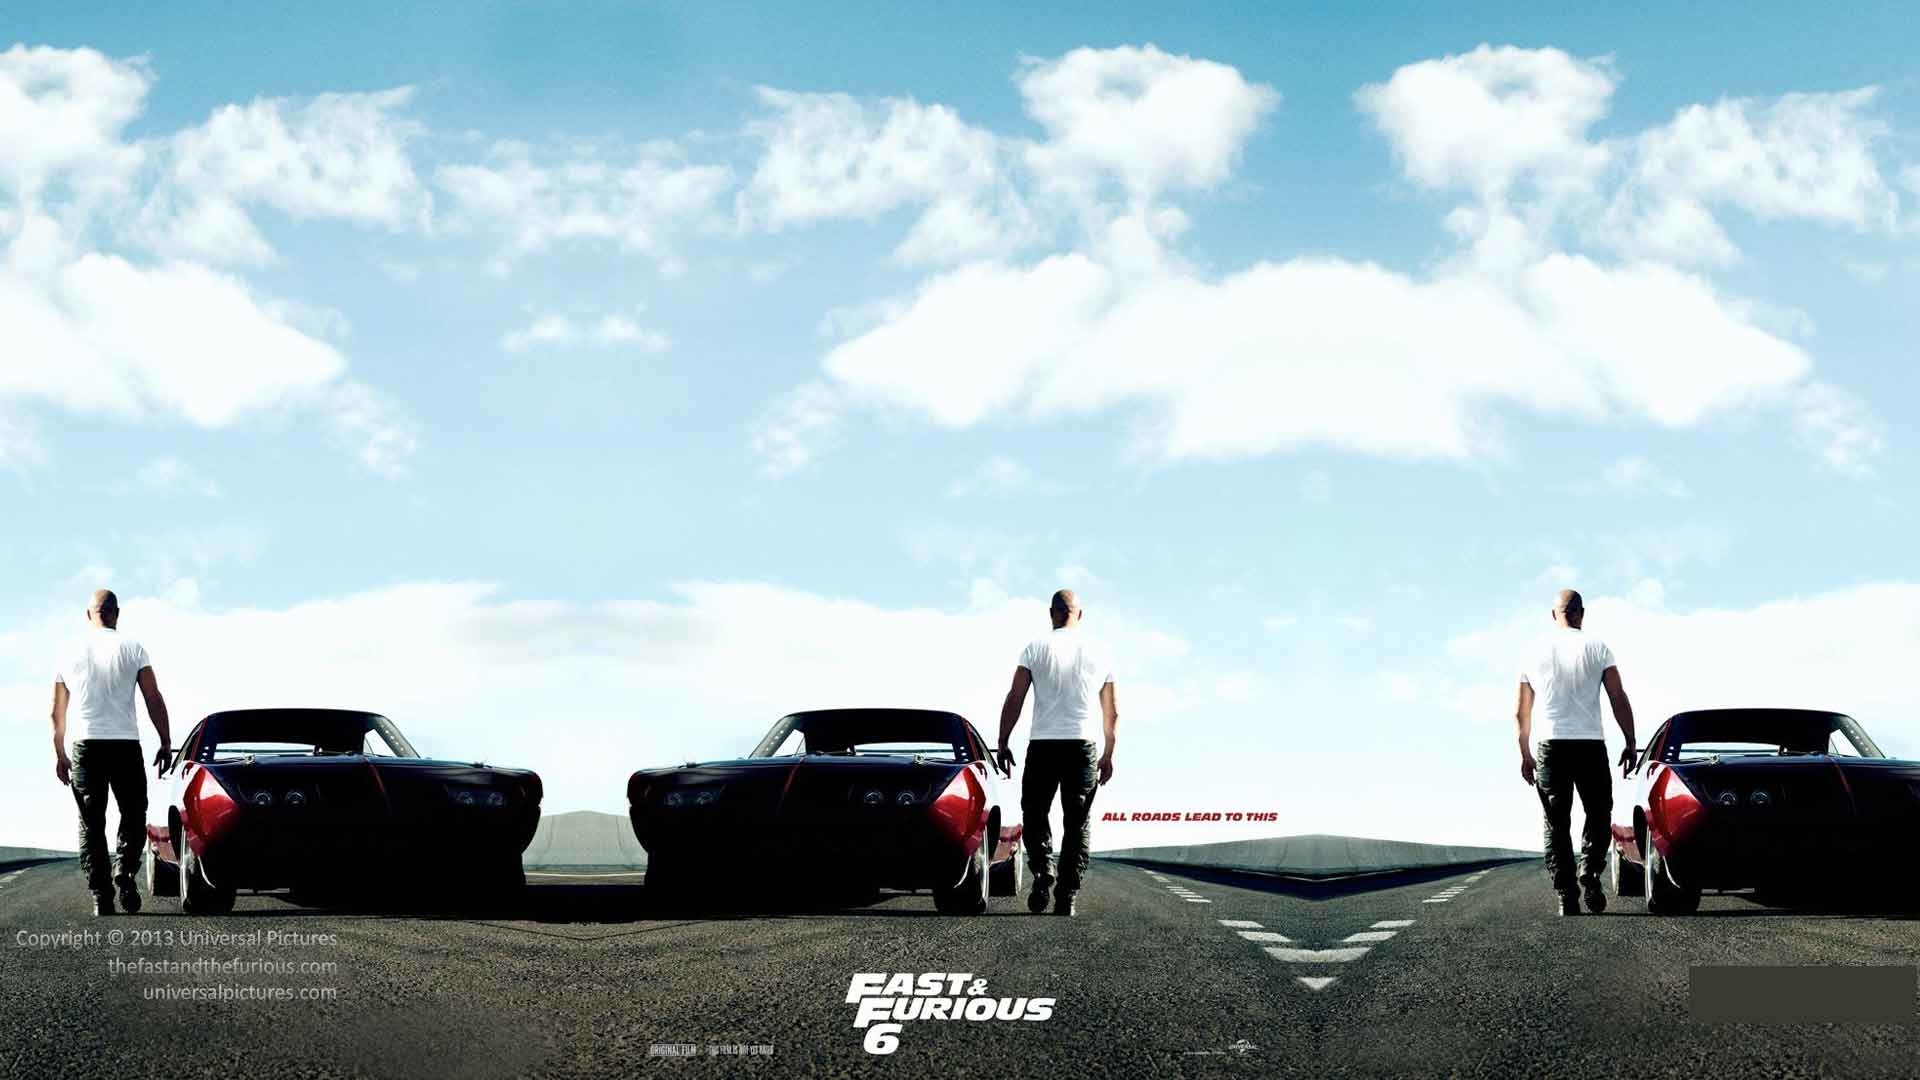 1920x1080 Fast and Furious 6 Wallpapers and Desktop Backgrounds